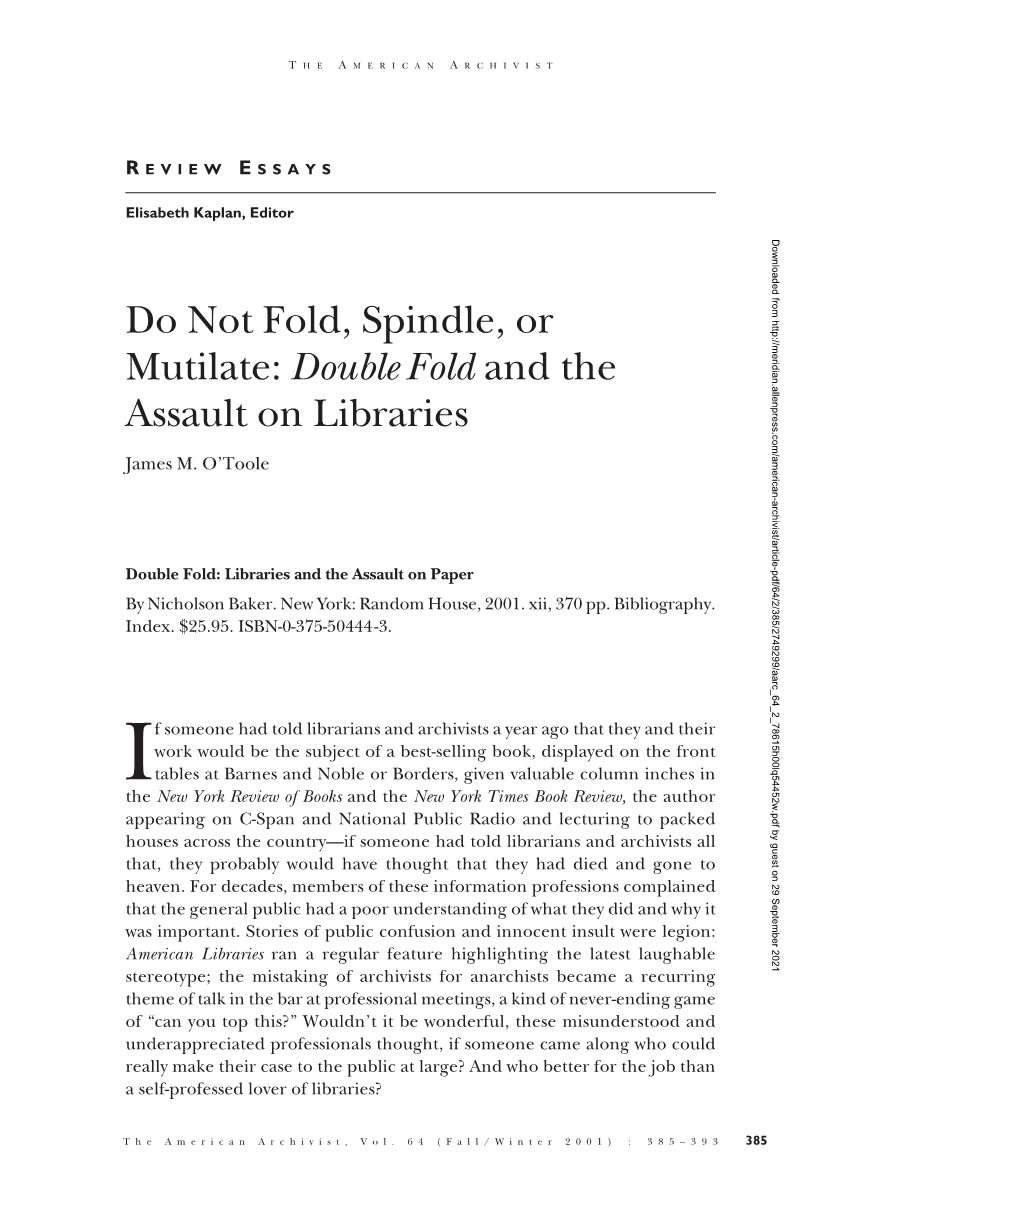 Double Fold and the Assault on Libraries